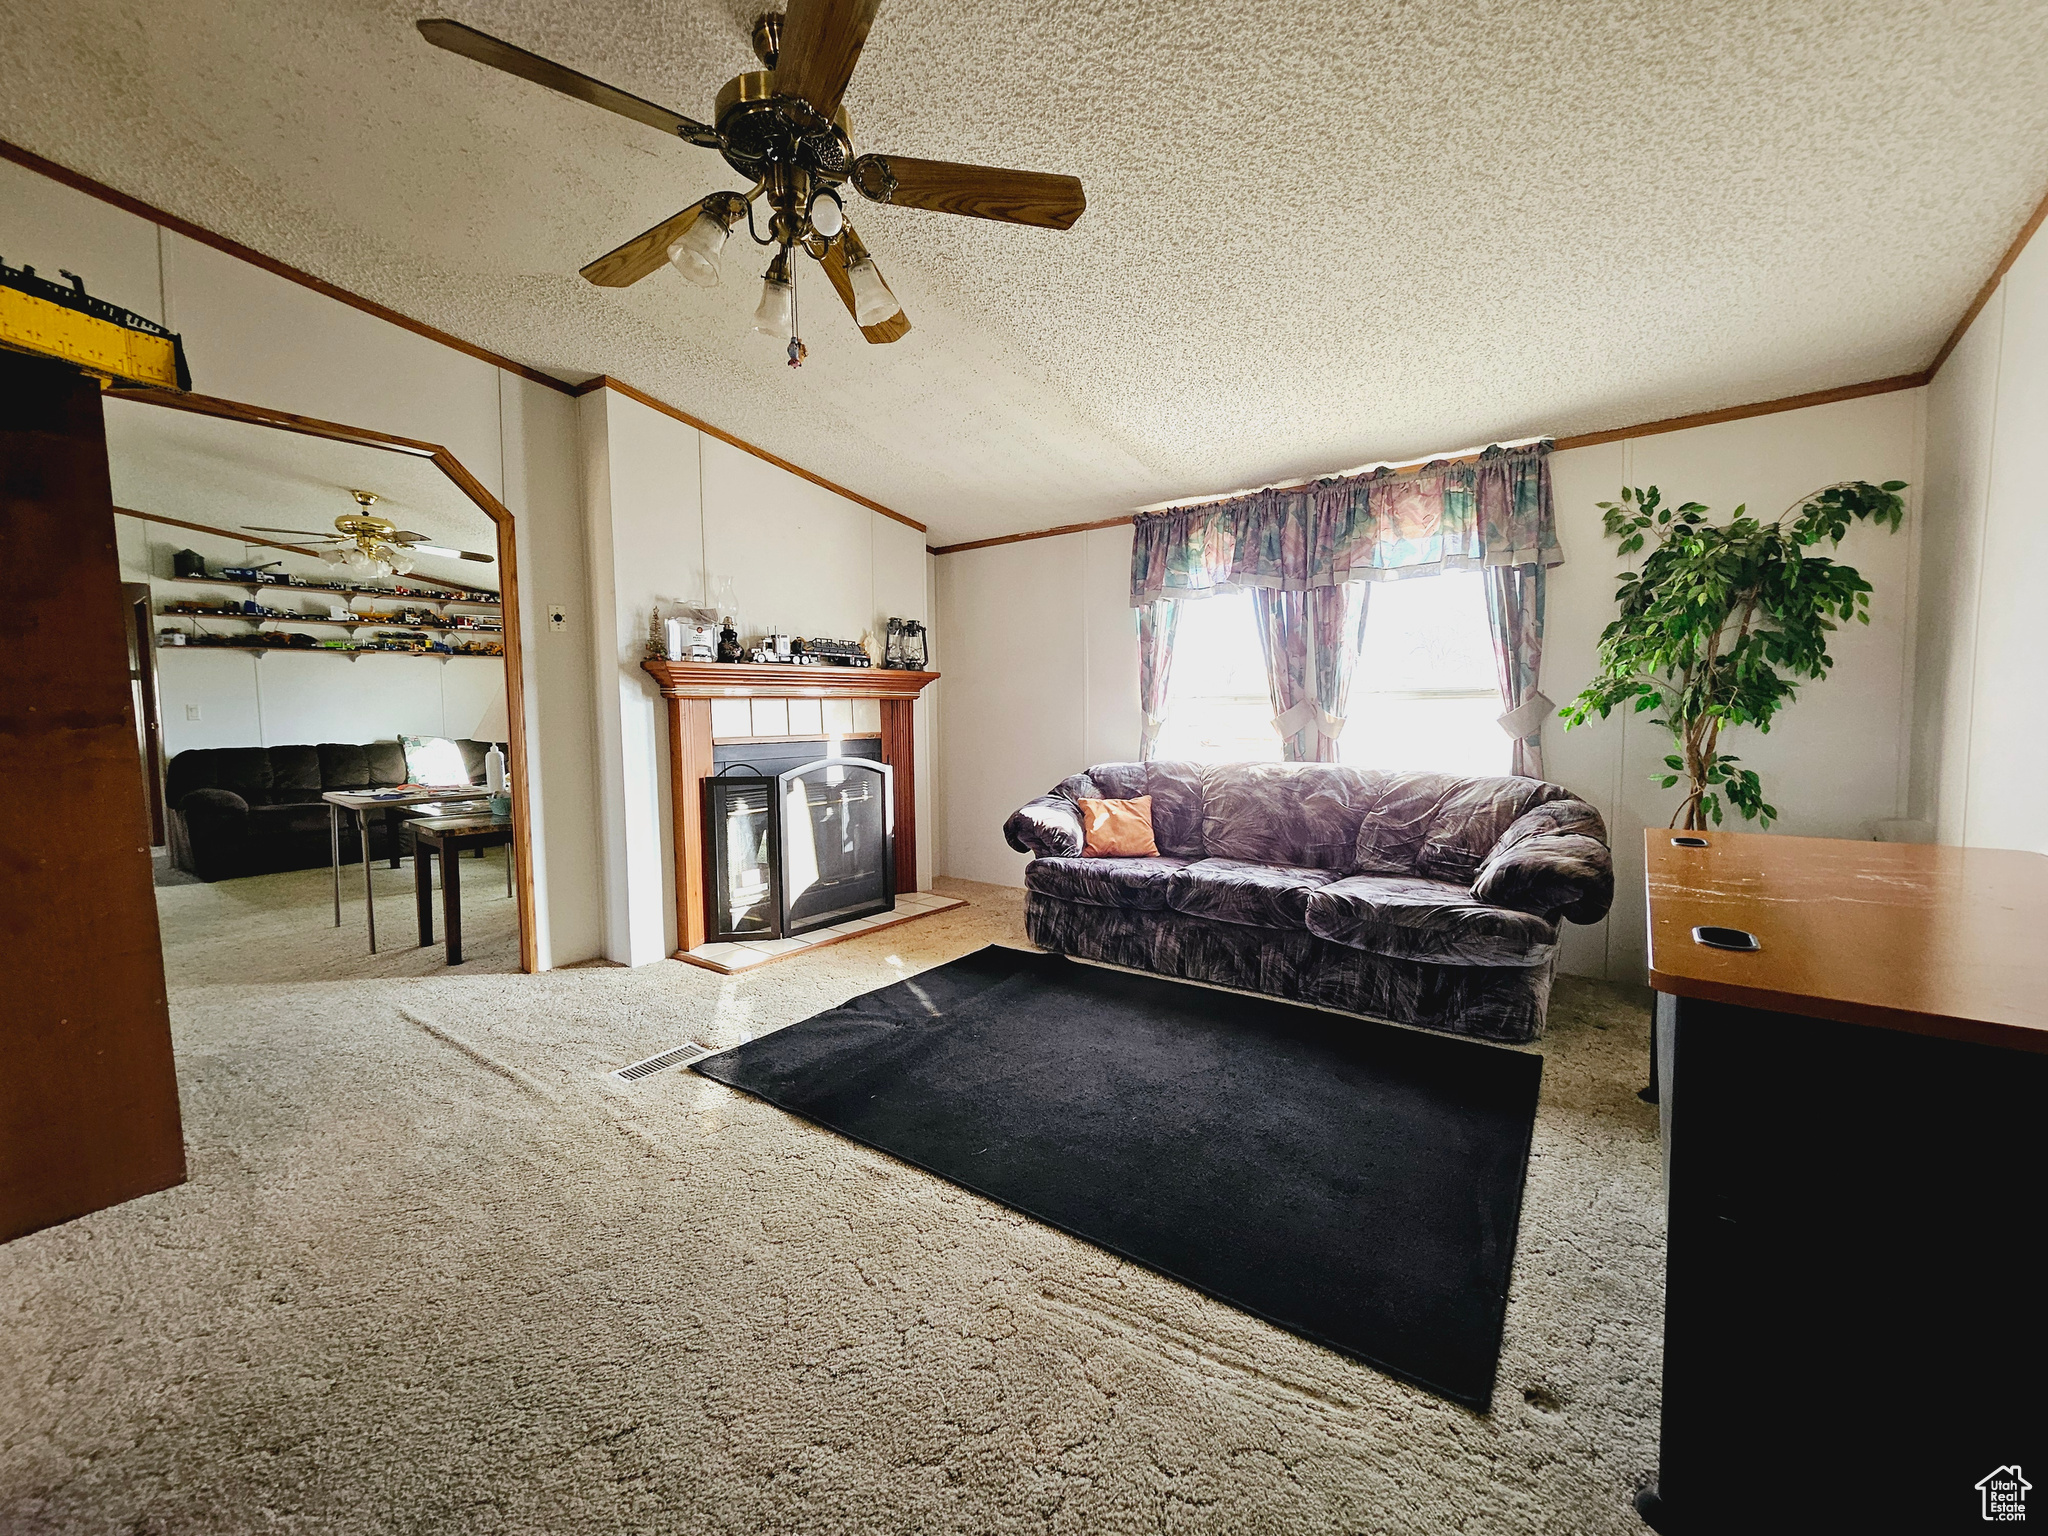 Living room with light carpet, a textured ceiling, and ceiling fan